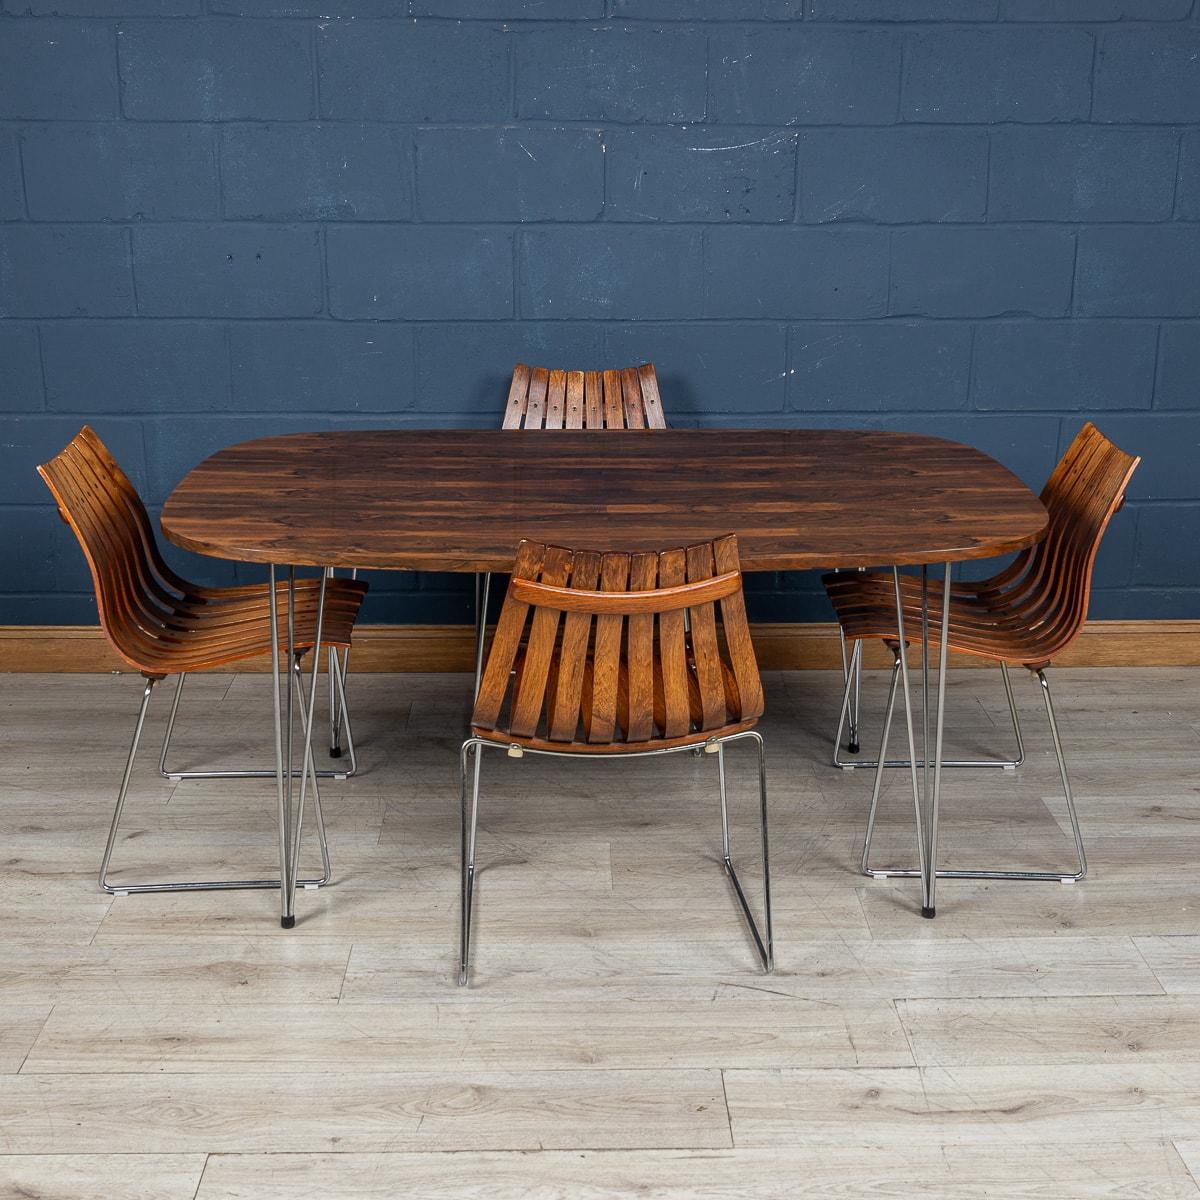 Other 20thC Rosewood Dining Table & Chairs By Hans Brattrud For Hove Mobler, Norway For Sale